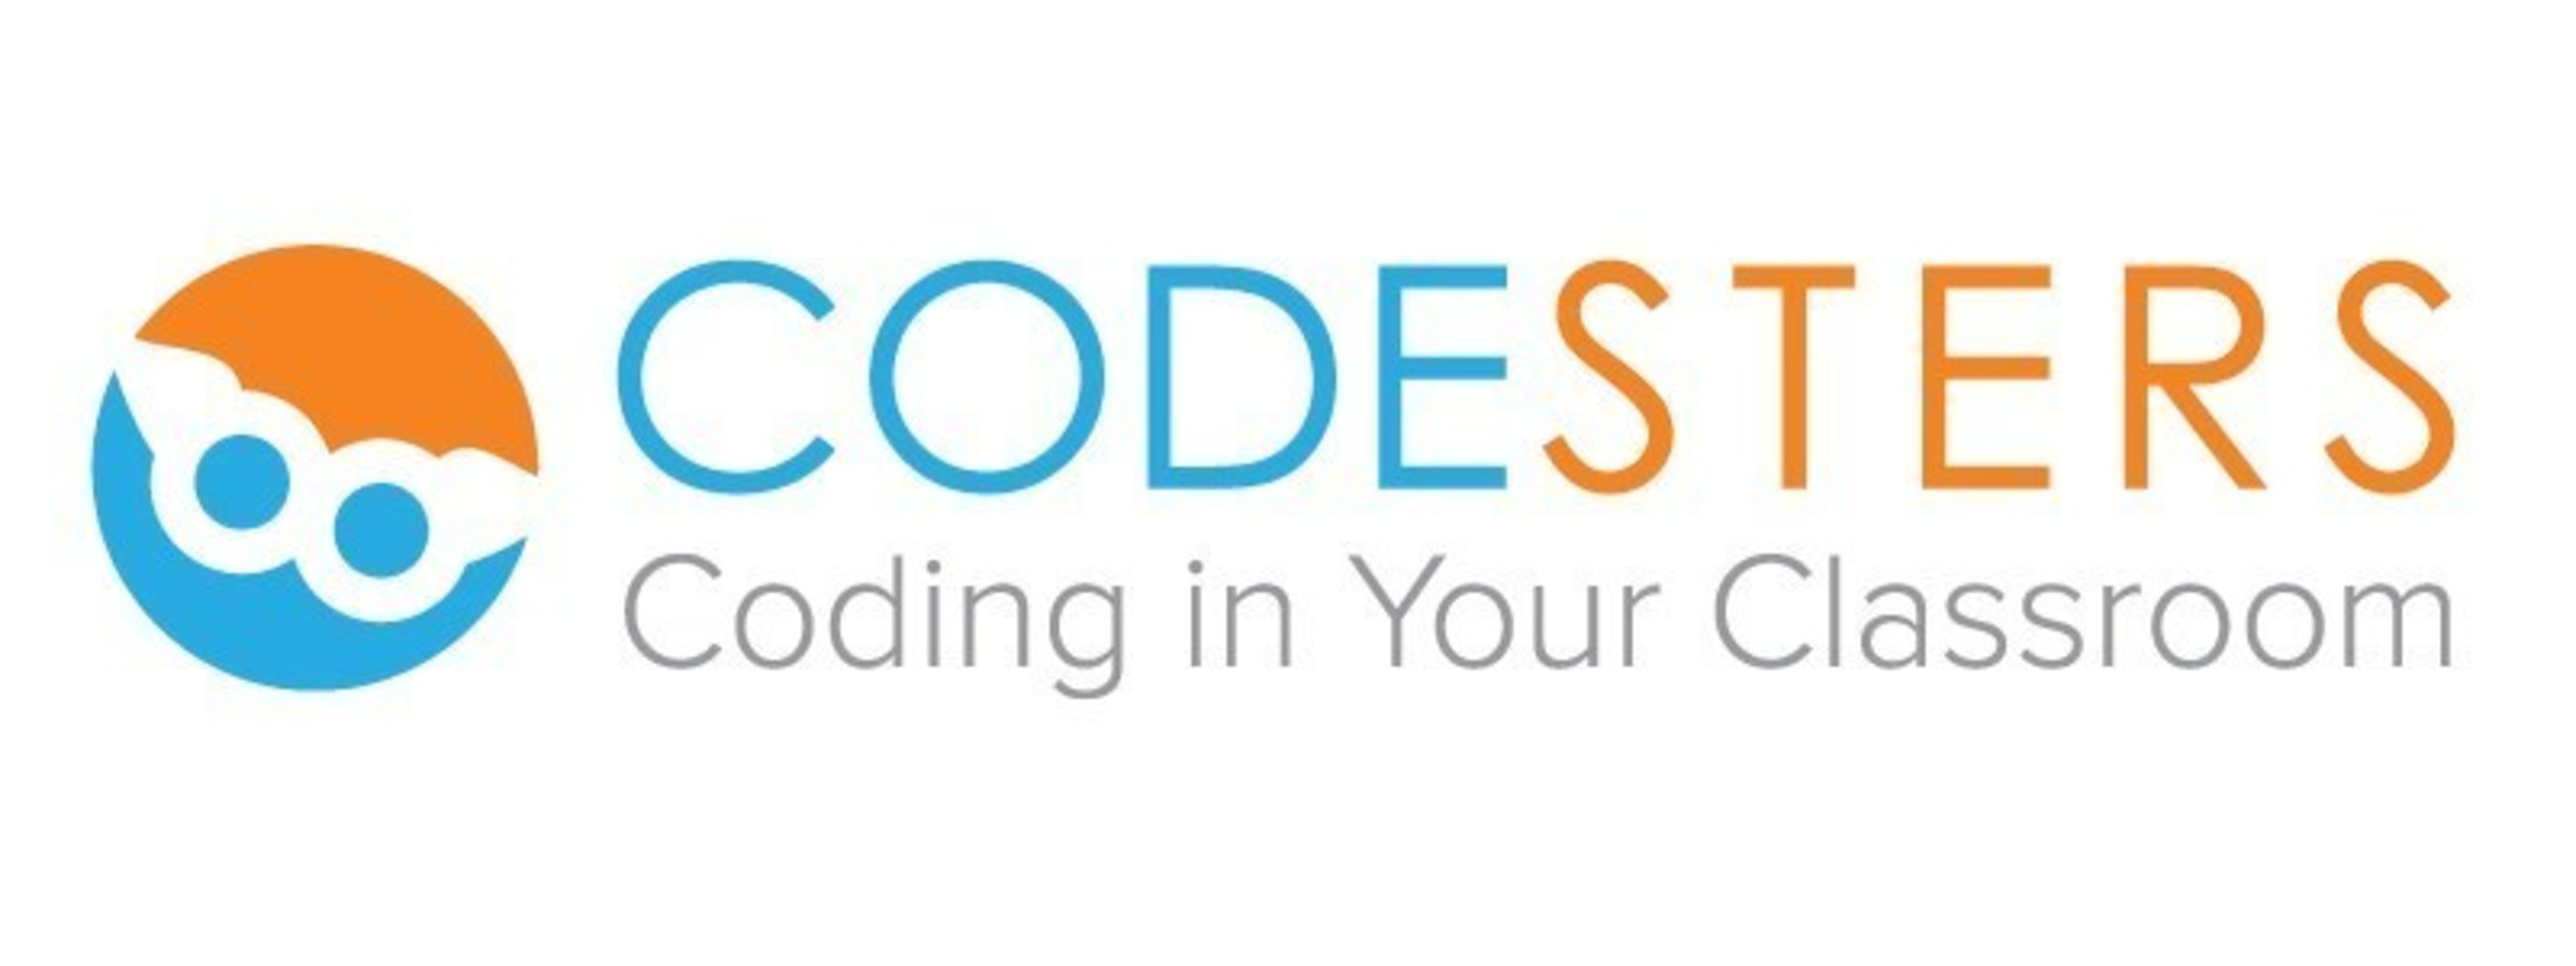 Codesters - Coding in your Classroom